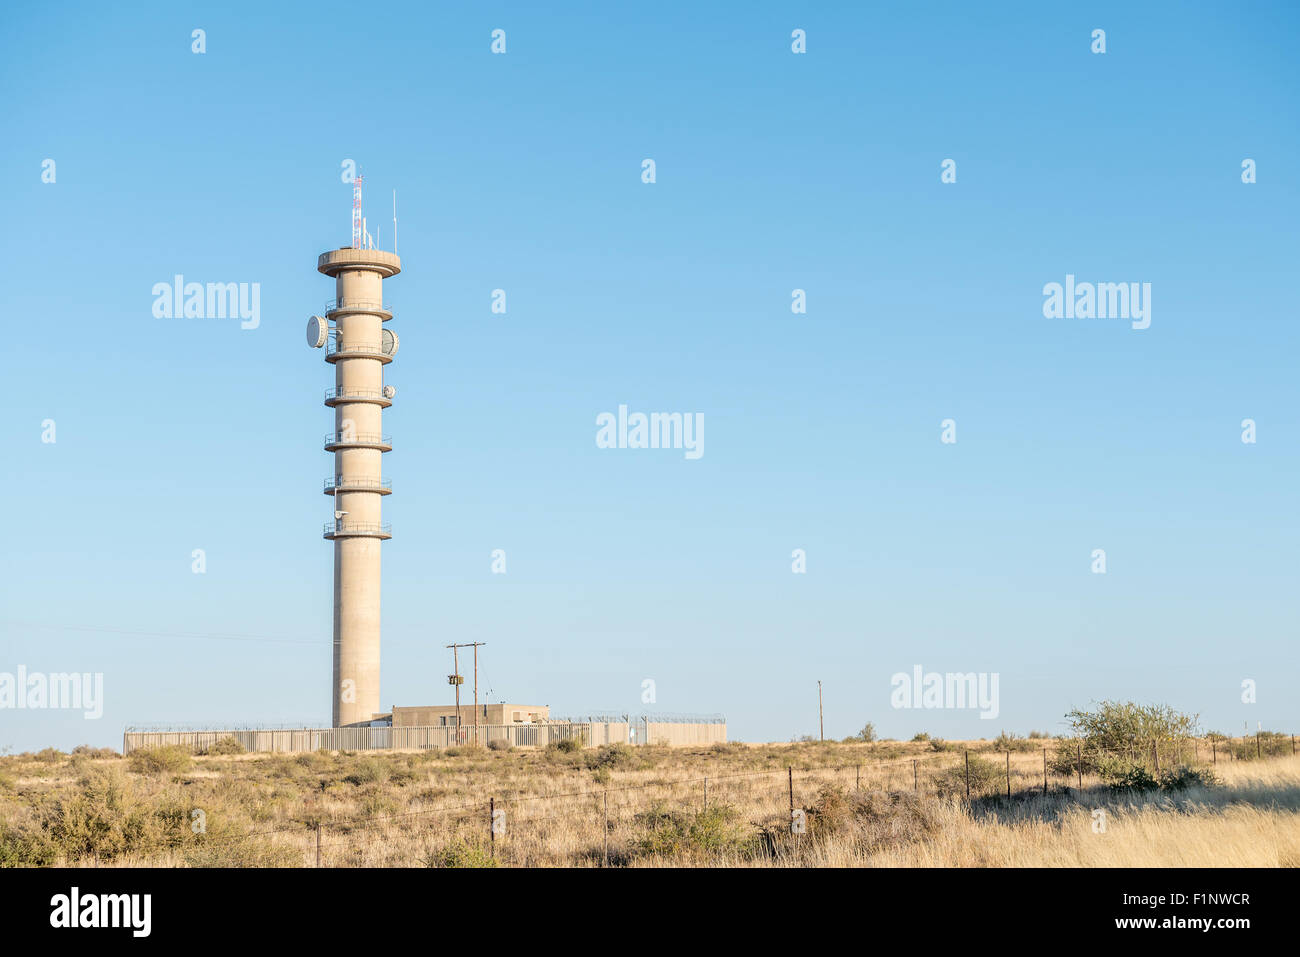 STRYDENBURG, SOUTH AFRICA - AUGUST 9, 2015: A microwave telecommunications relay tower near Strydenburg in the Northern Cape Pro Stock Photo